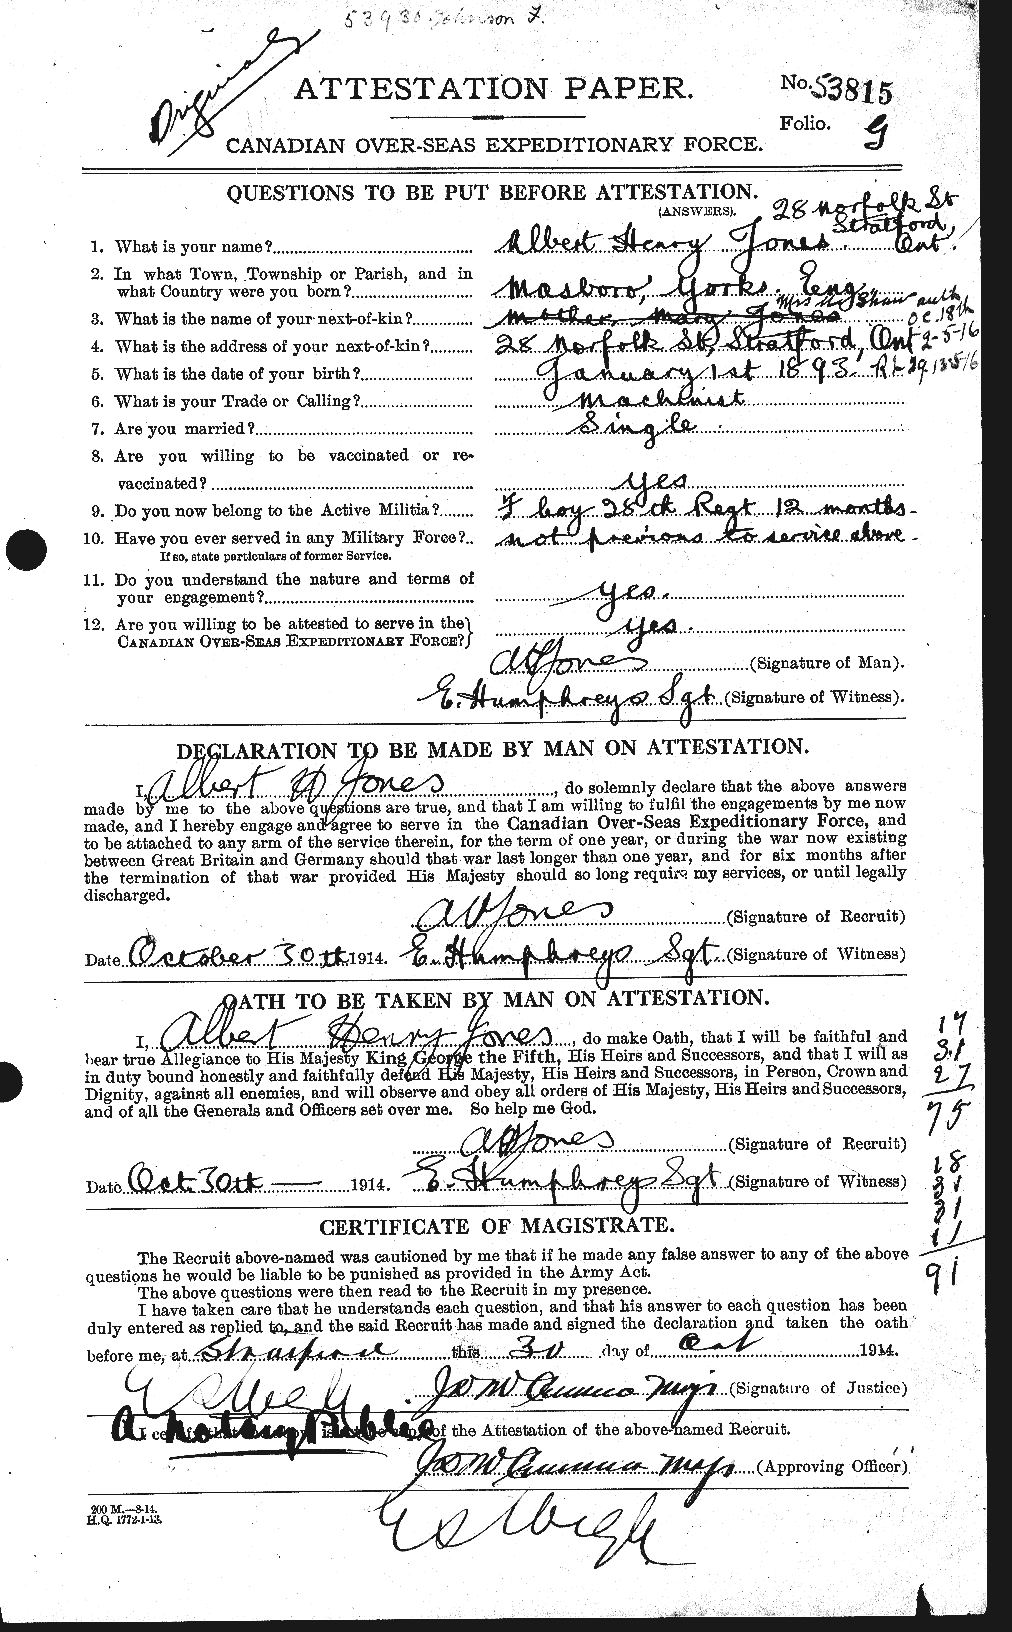 Personnel Records of the First World War - CEF 422467a